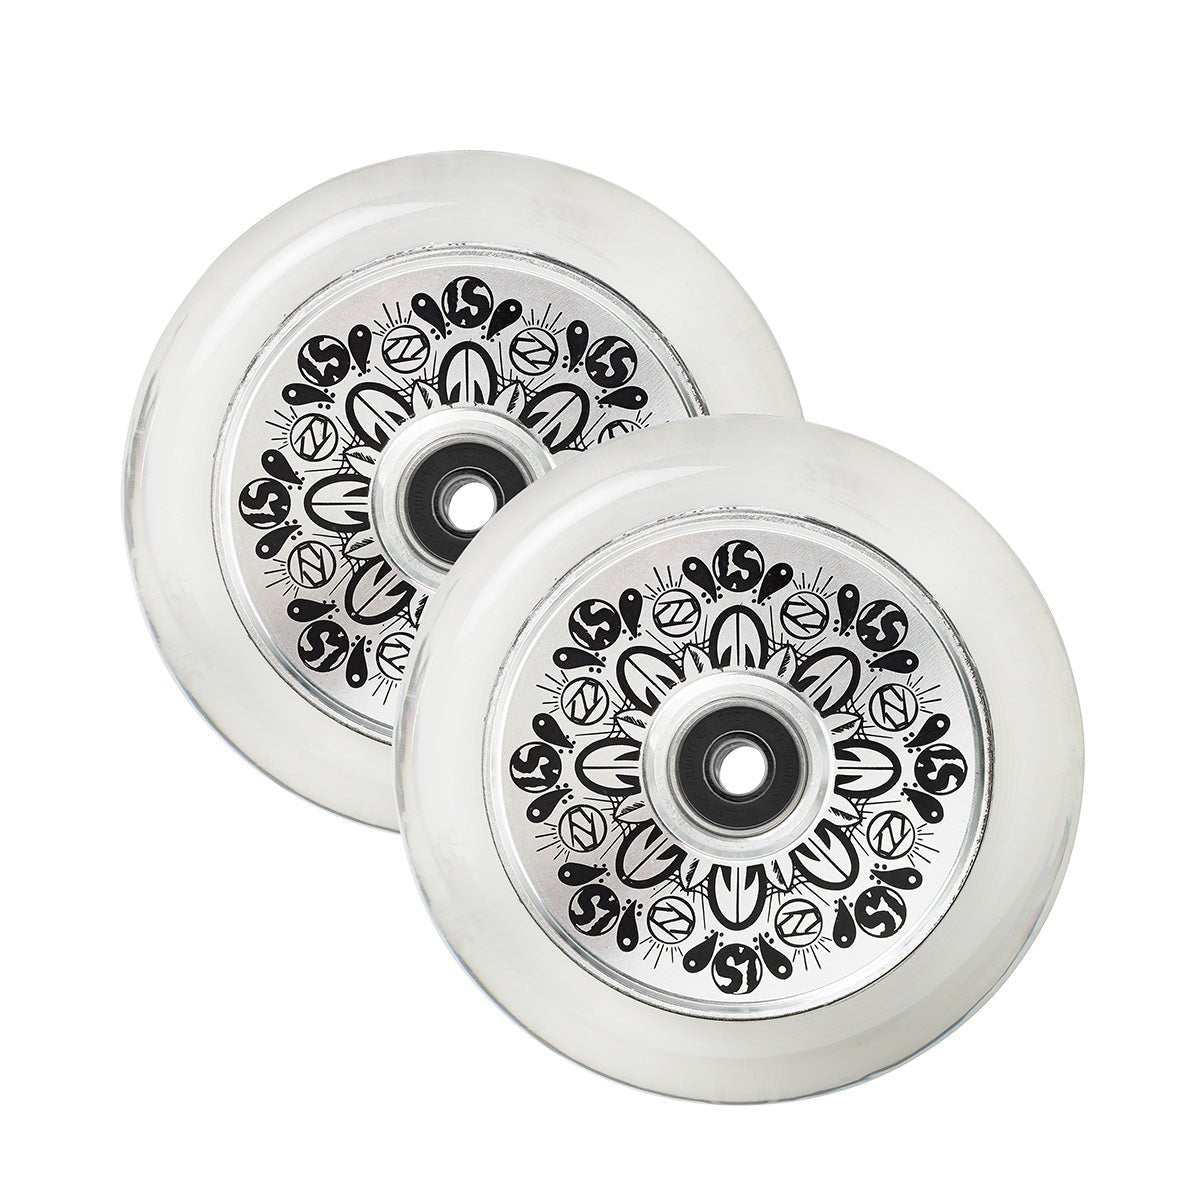 Fuzion Leo Spencer V1 Signature Wheels - Riding Scooters - Bland Pro Shop